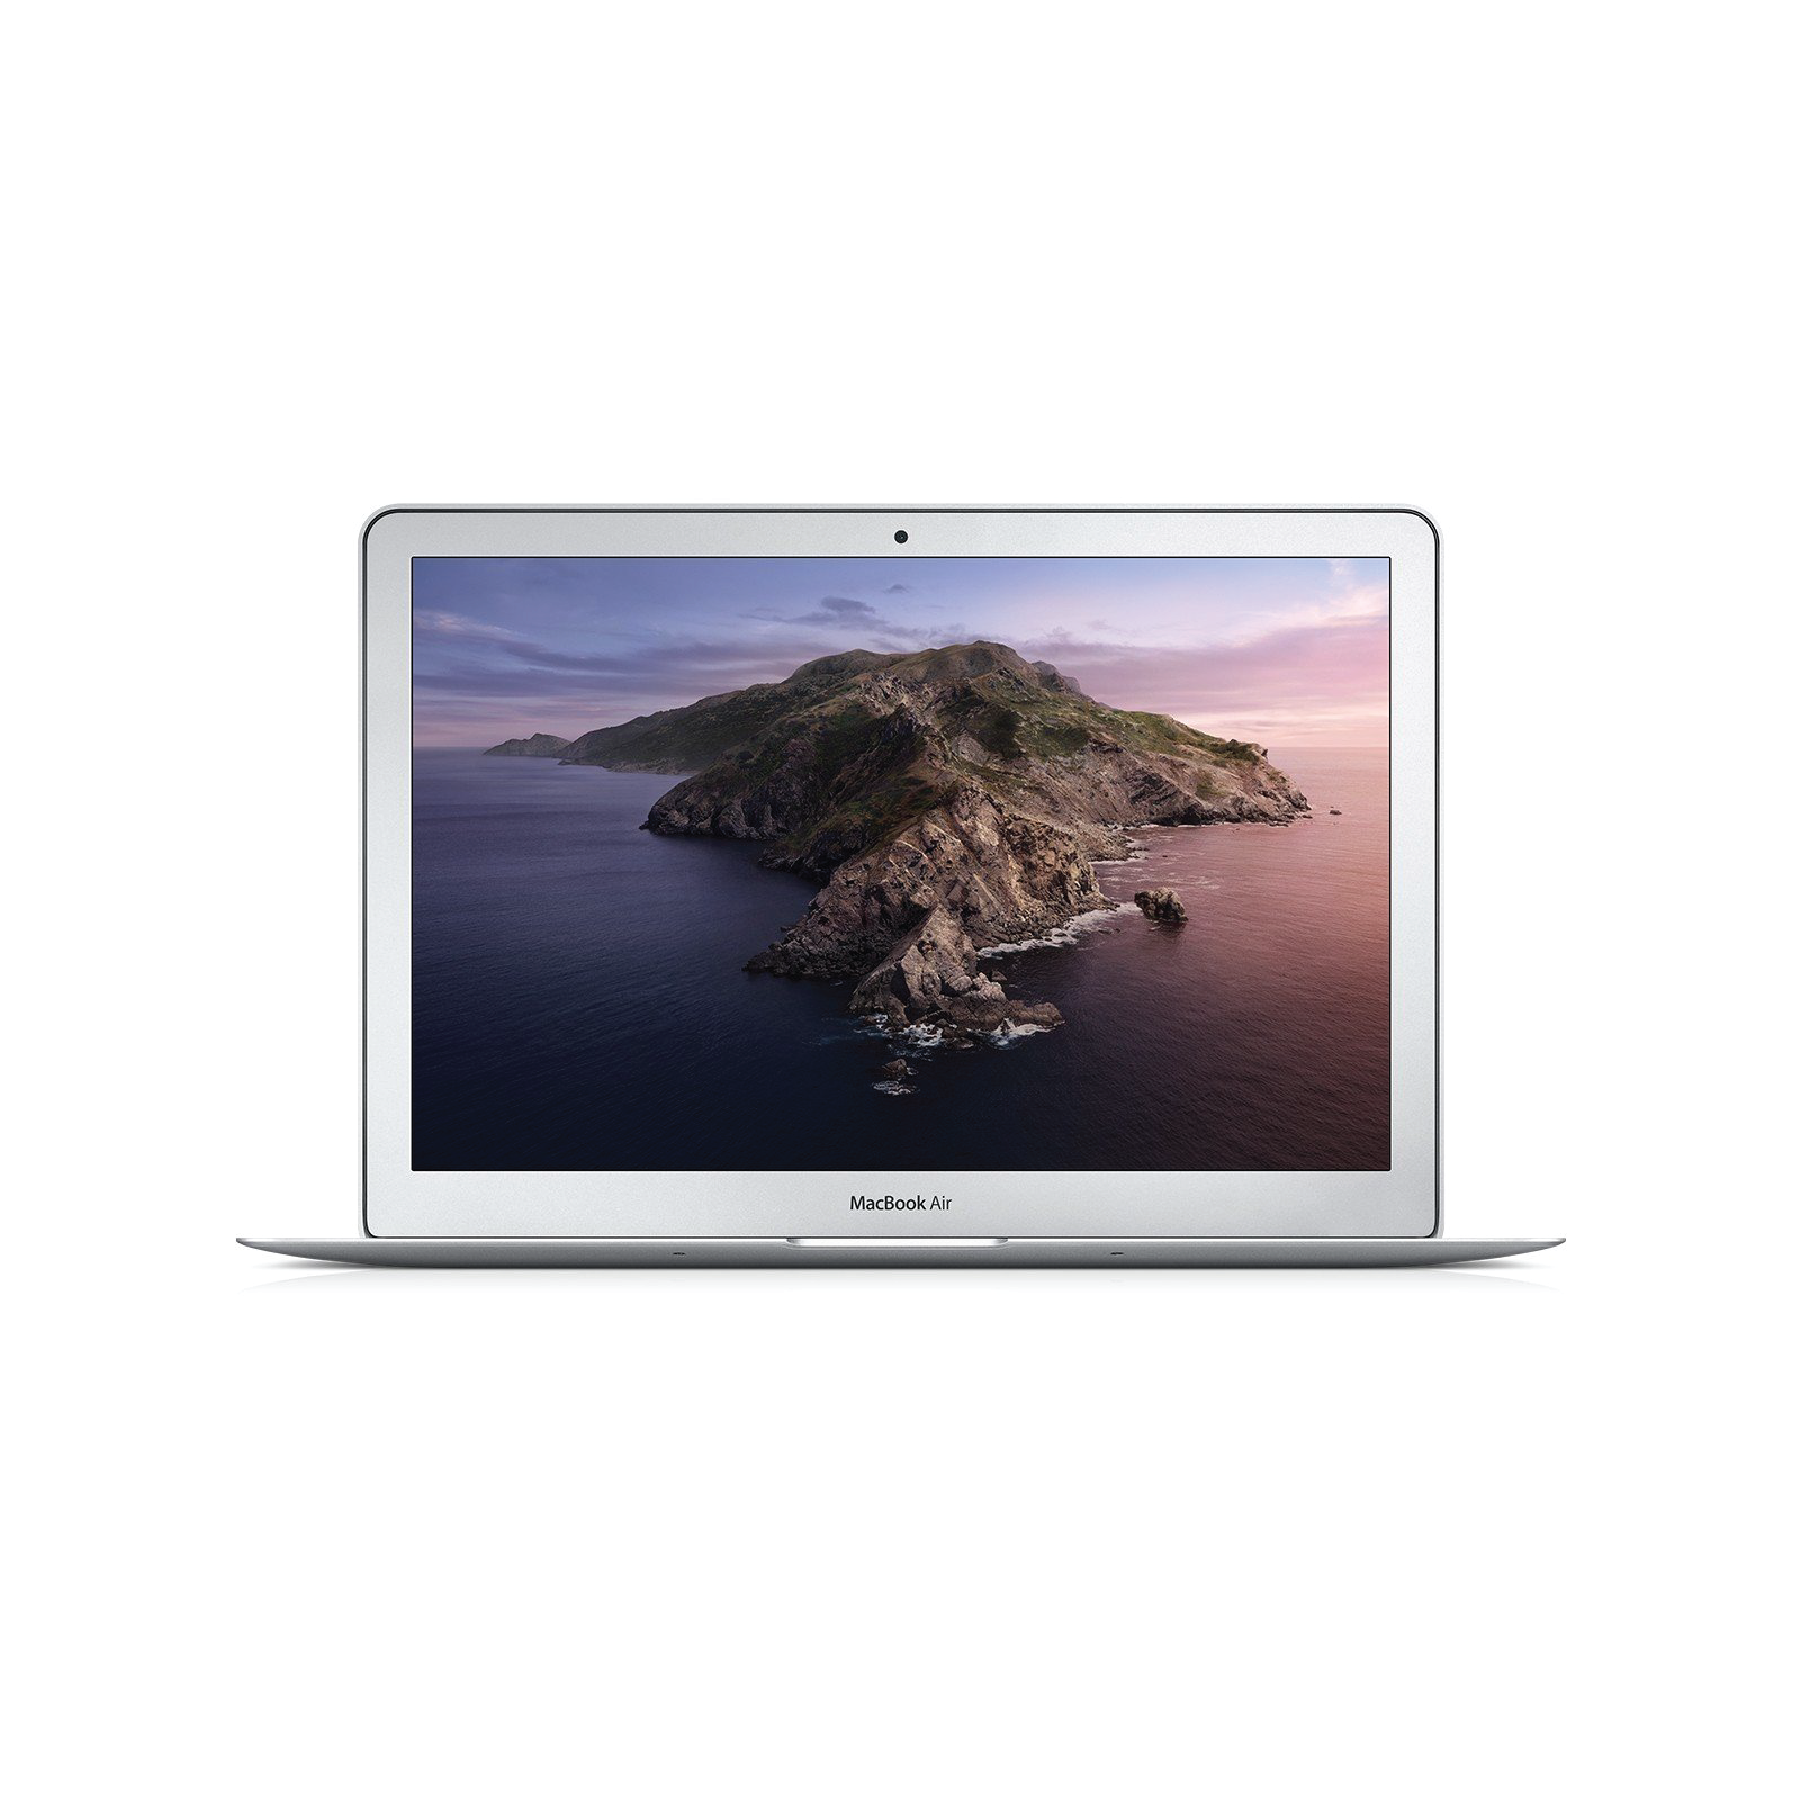 MacBook Air (13-inch, 2017) 1.8GHz, Intel Core i5 128GB - Silver (Better) - iStore Pre-owned